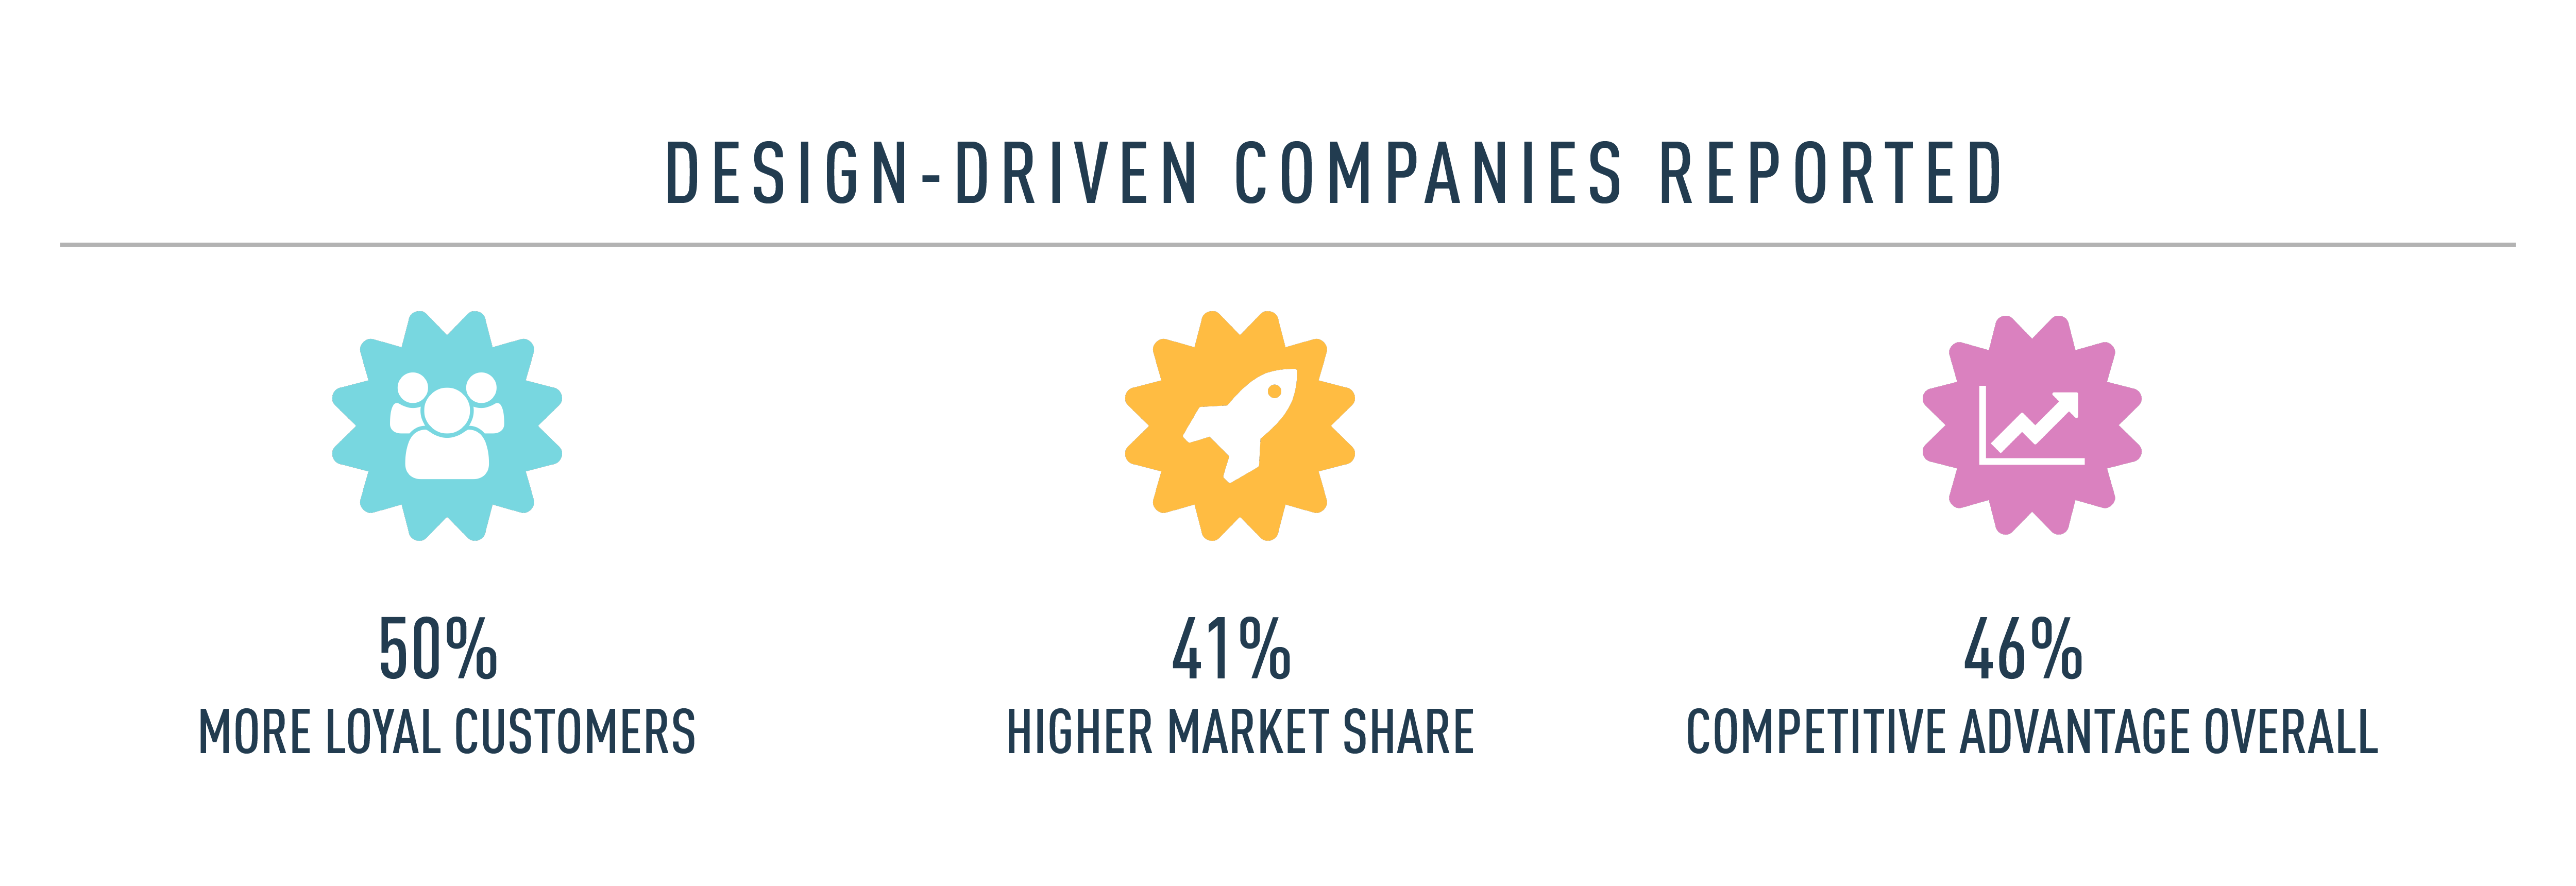 An infographic showing the advantages reported by design-led businesses